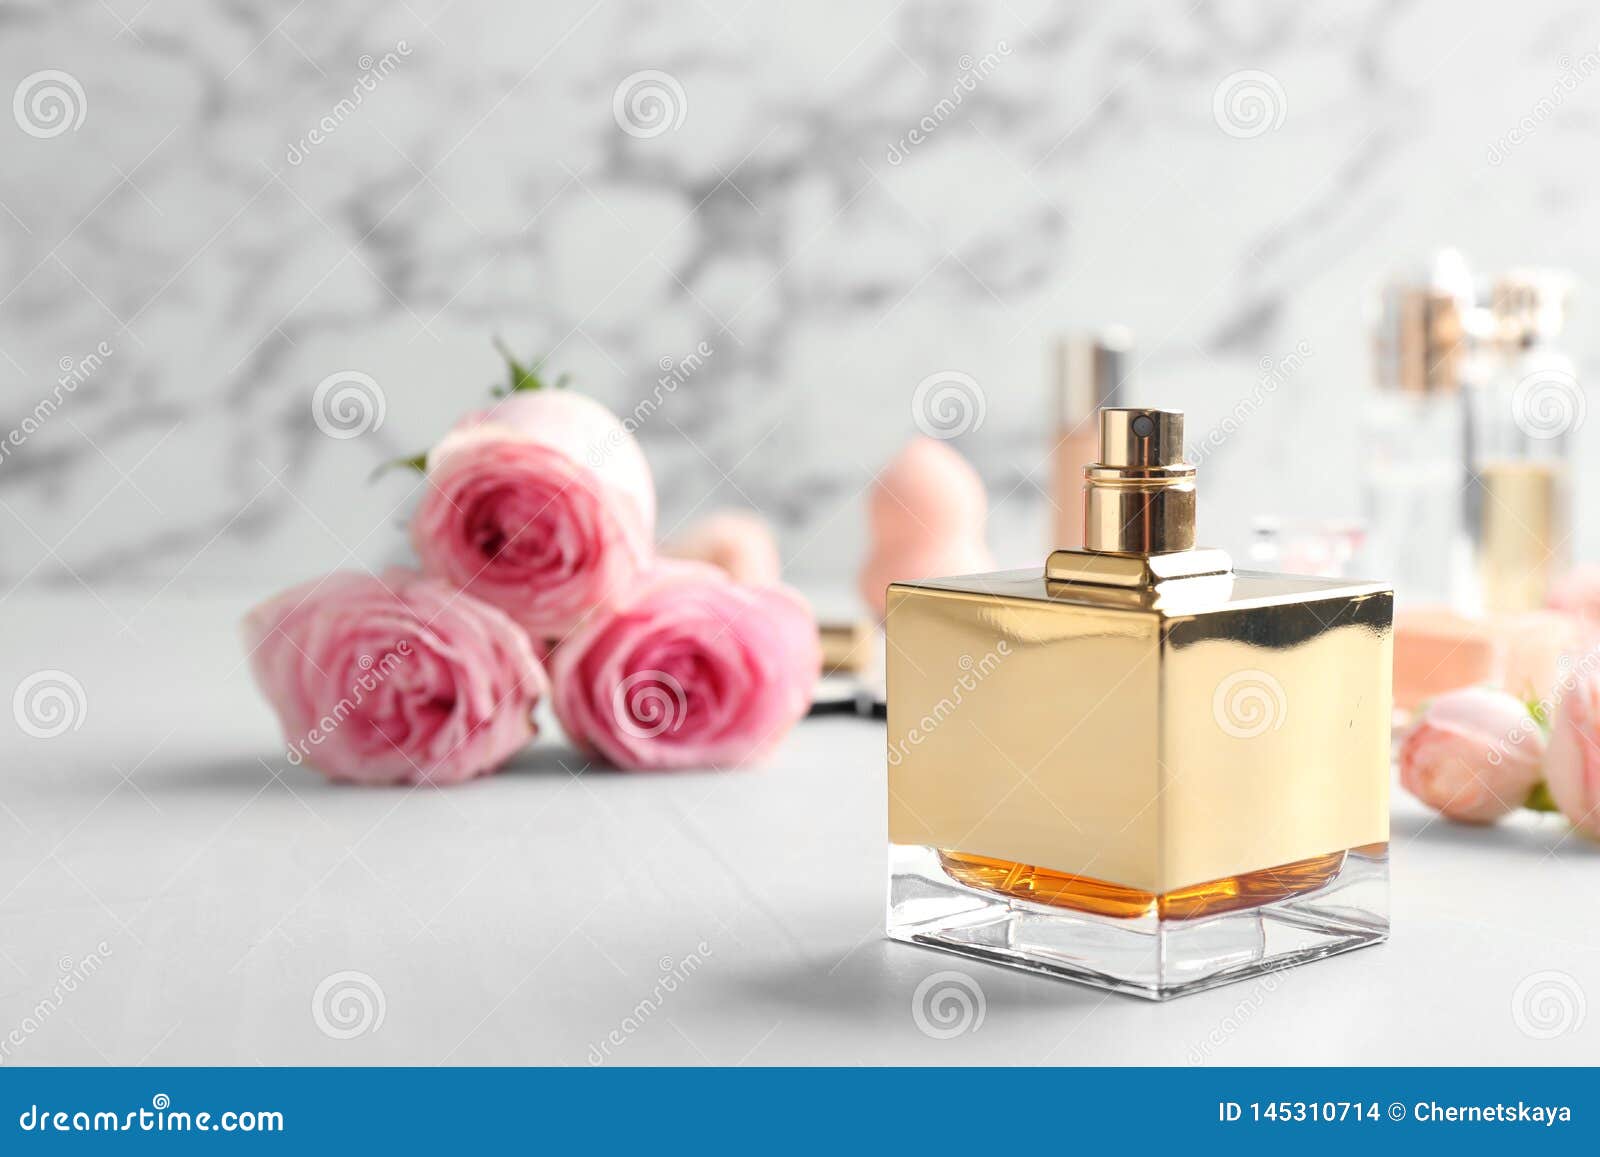 Bottle of Perfume and Roses on Table Against Marble Background Stock ...